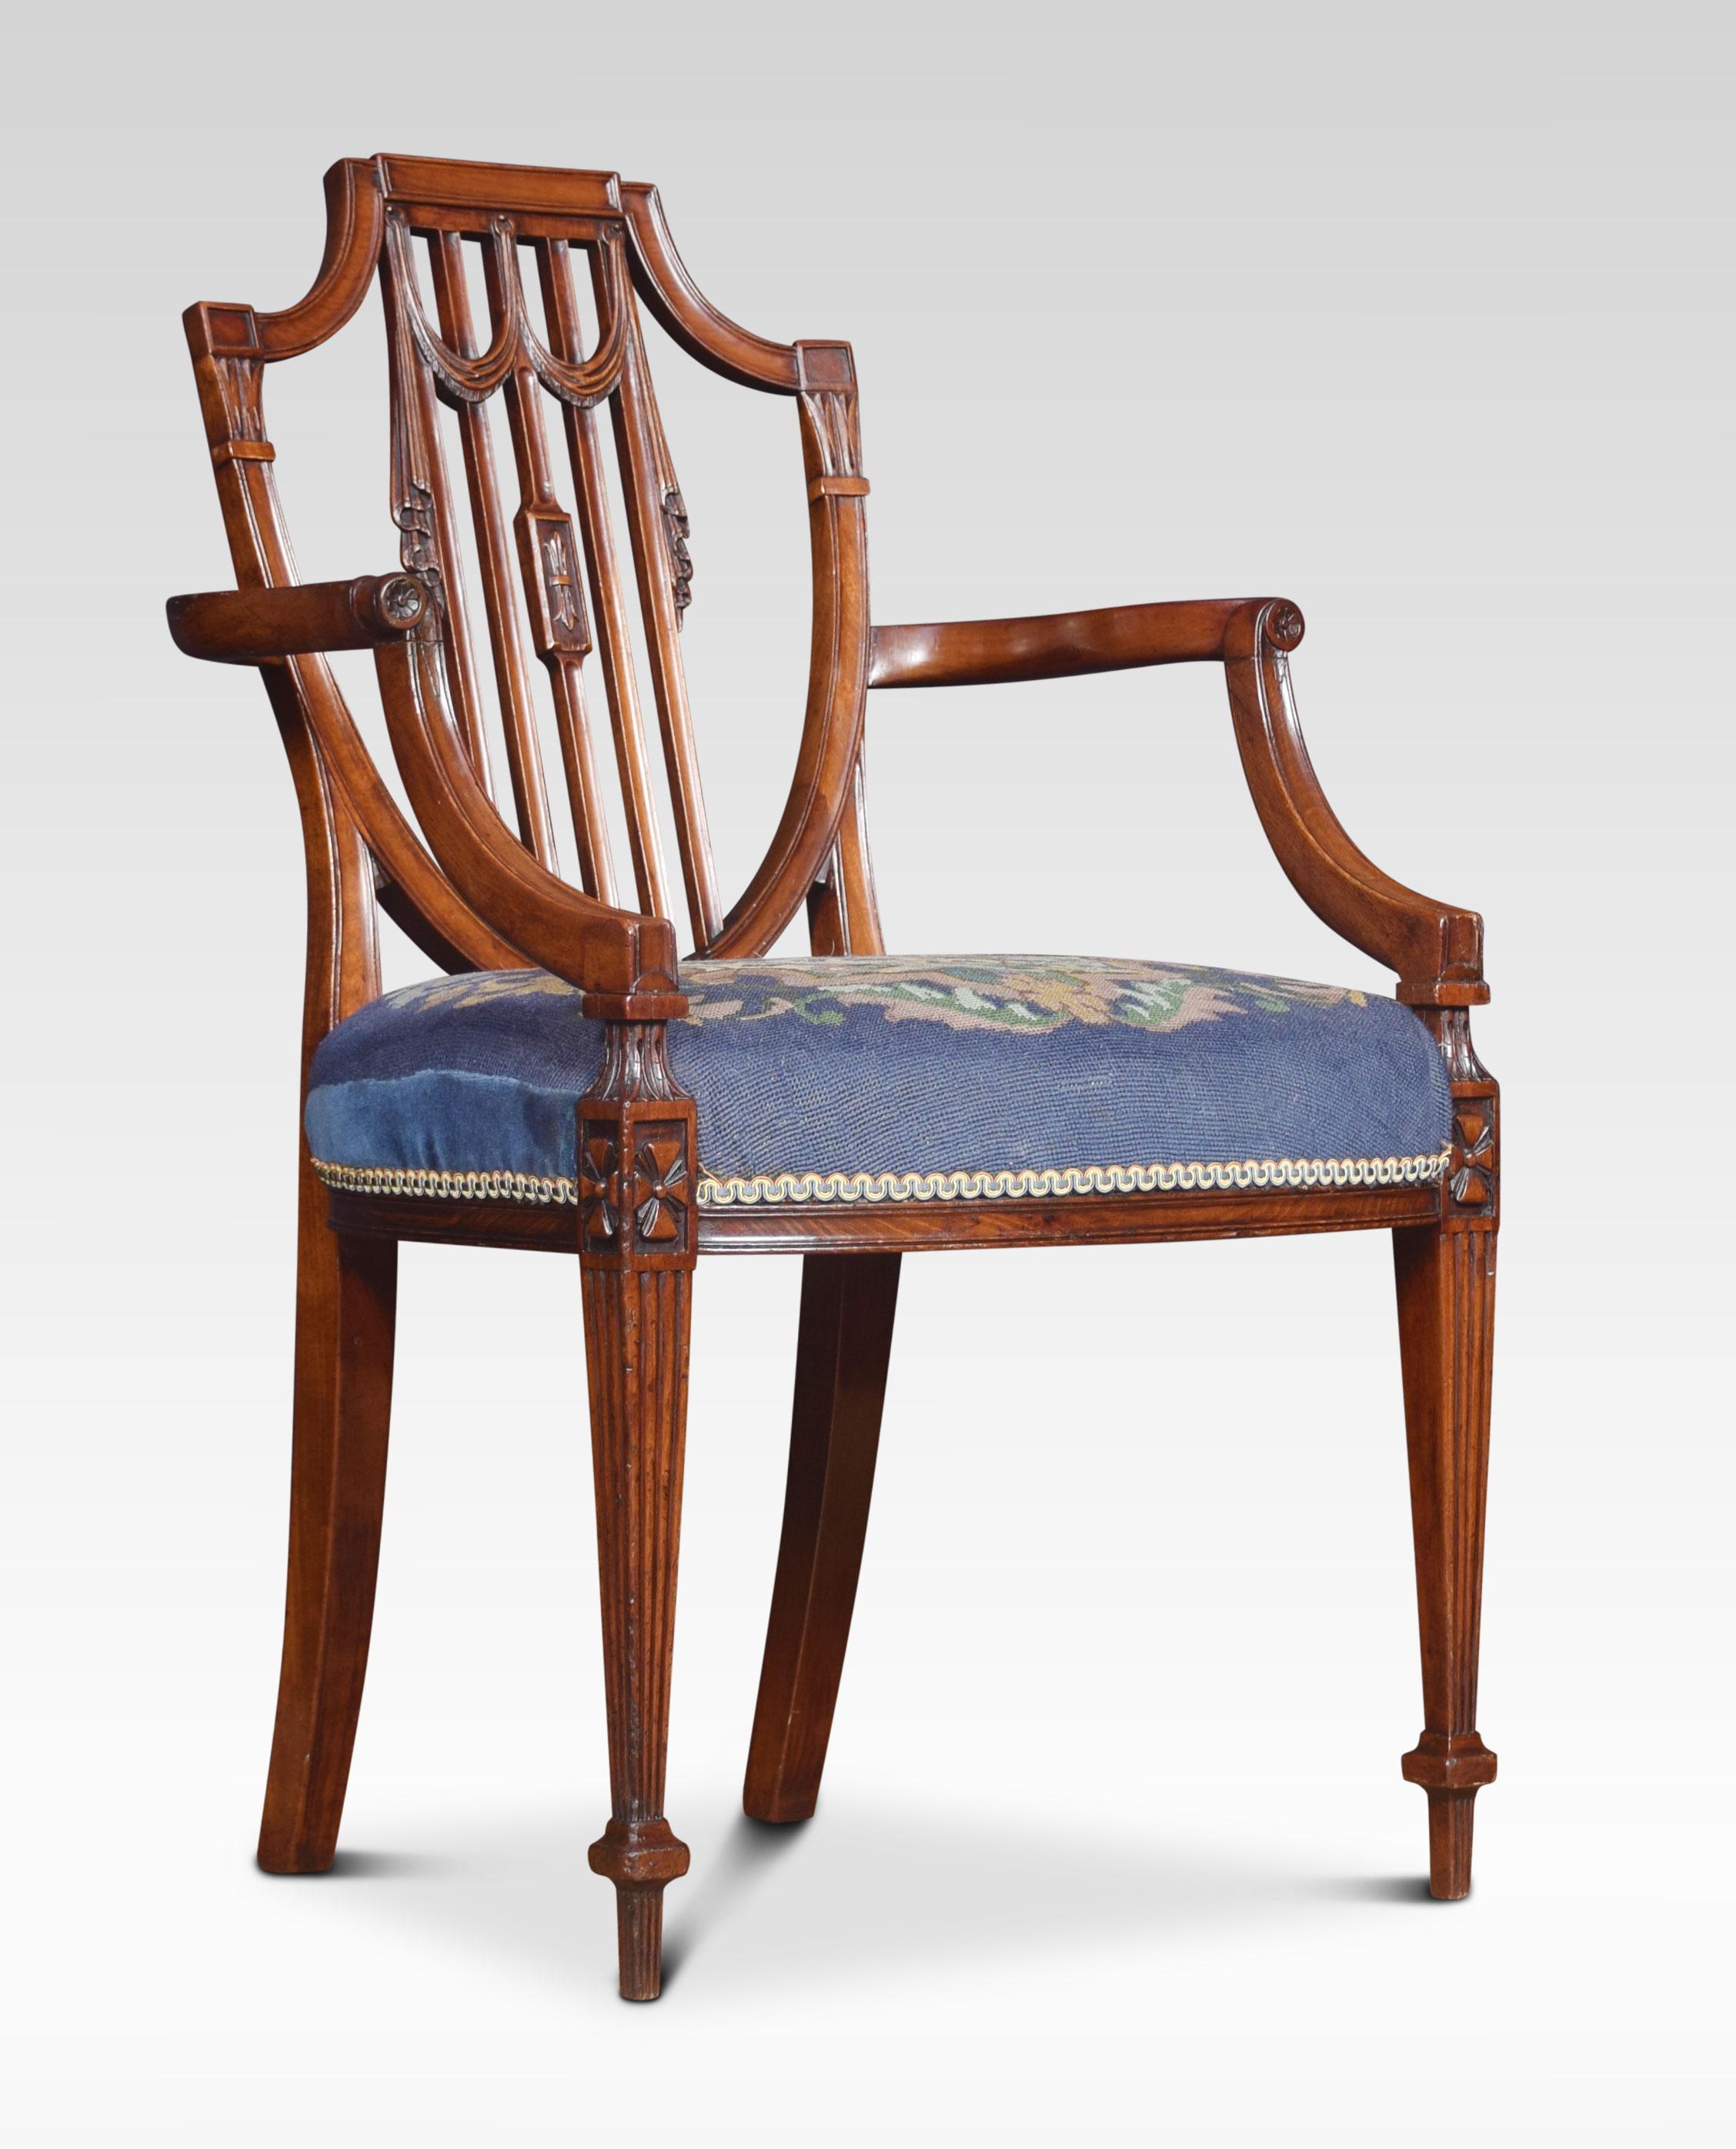 19th century Hepplewhite design mahogany armchair with carved and reeded decoration the shield shape backrest over a needlepoint seat. All raised up on square tapering legs.
Dimensions:
Height 37 inches height to seat 19.5 inches
Width 23